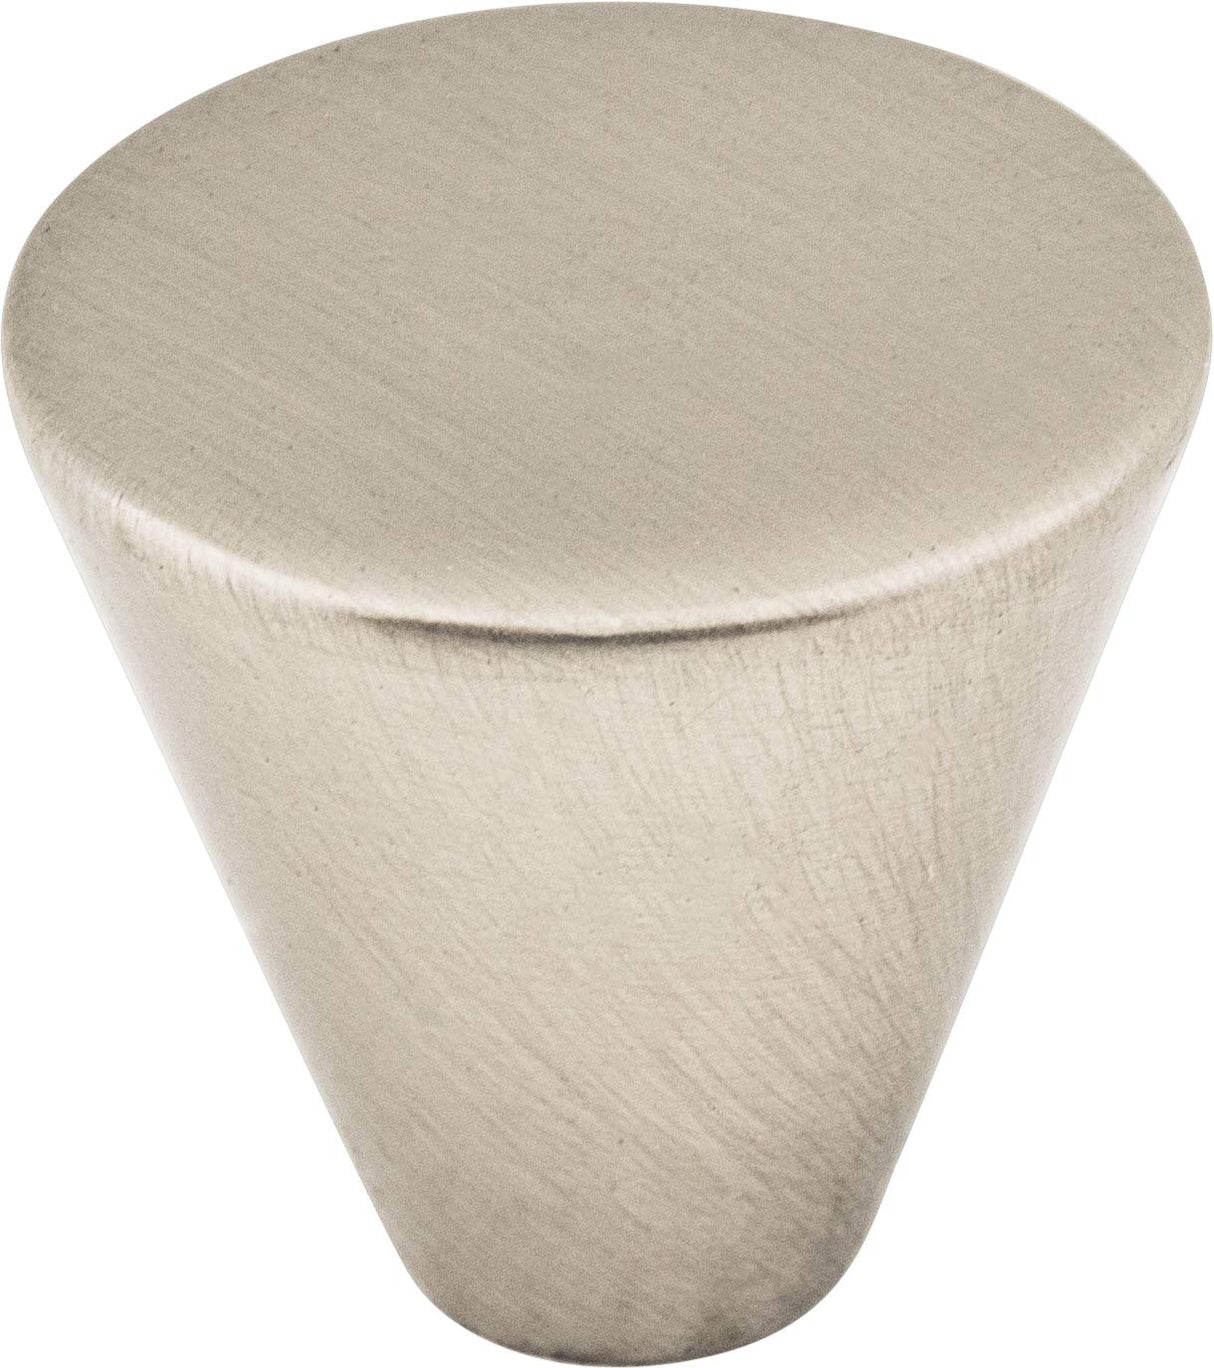 Elements 26SN-R 1" Diameter Satin Nickel Conical Sedona Retail Packaged Cabinet Knob